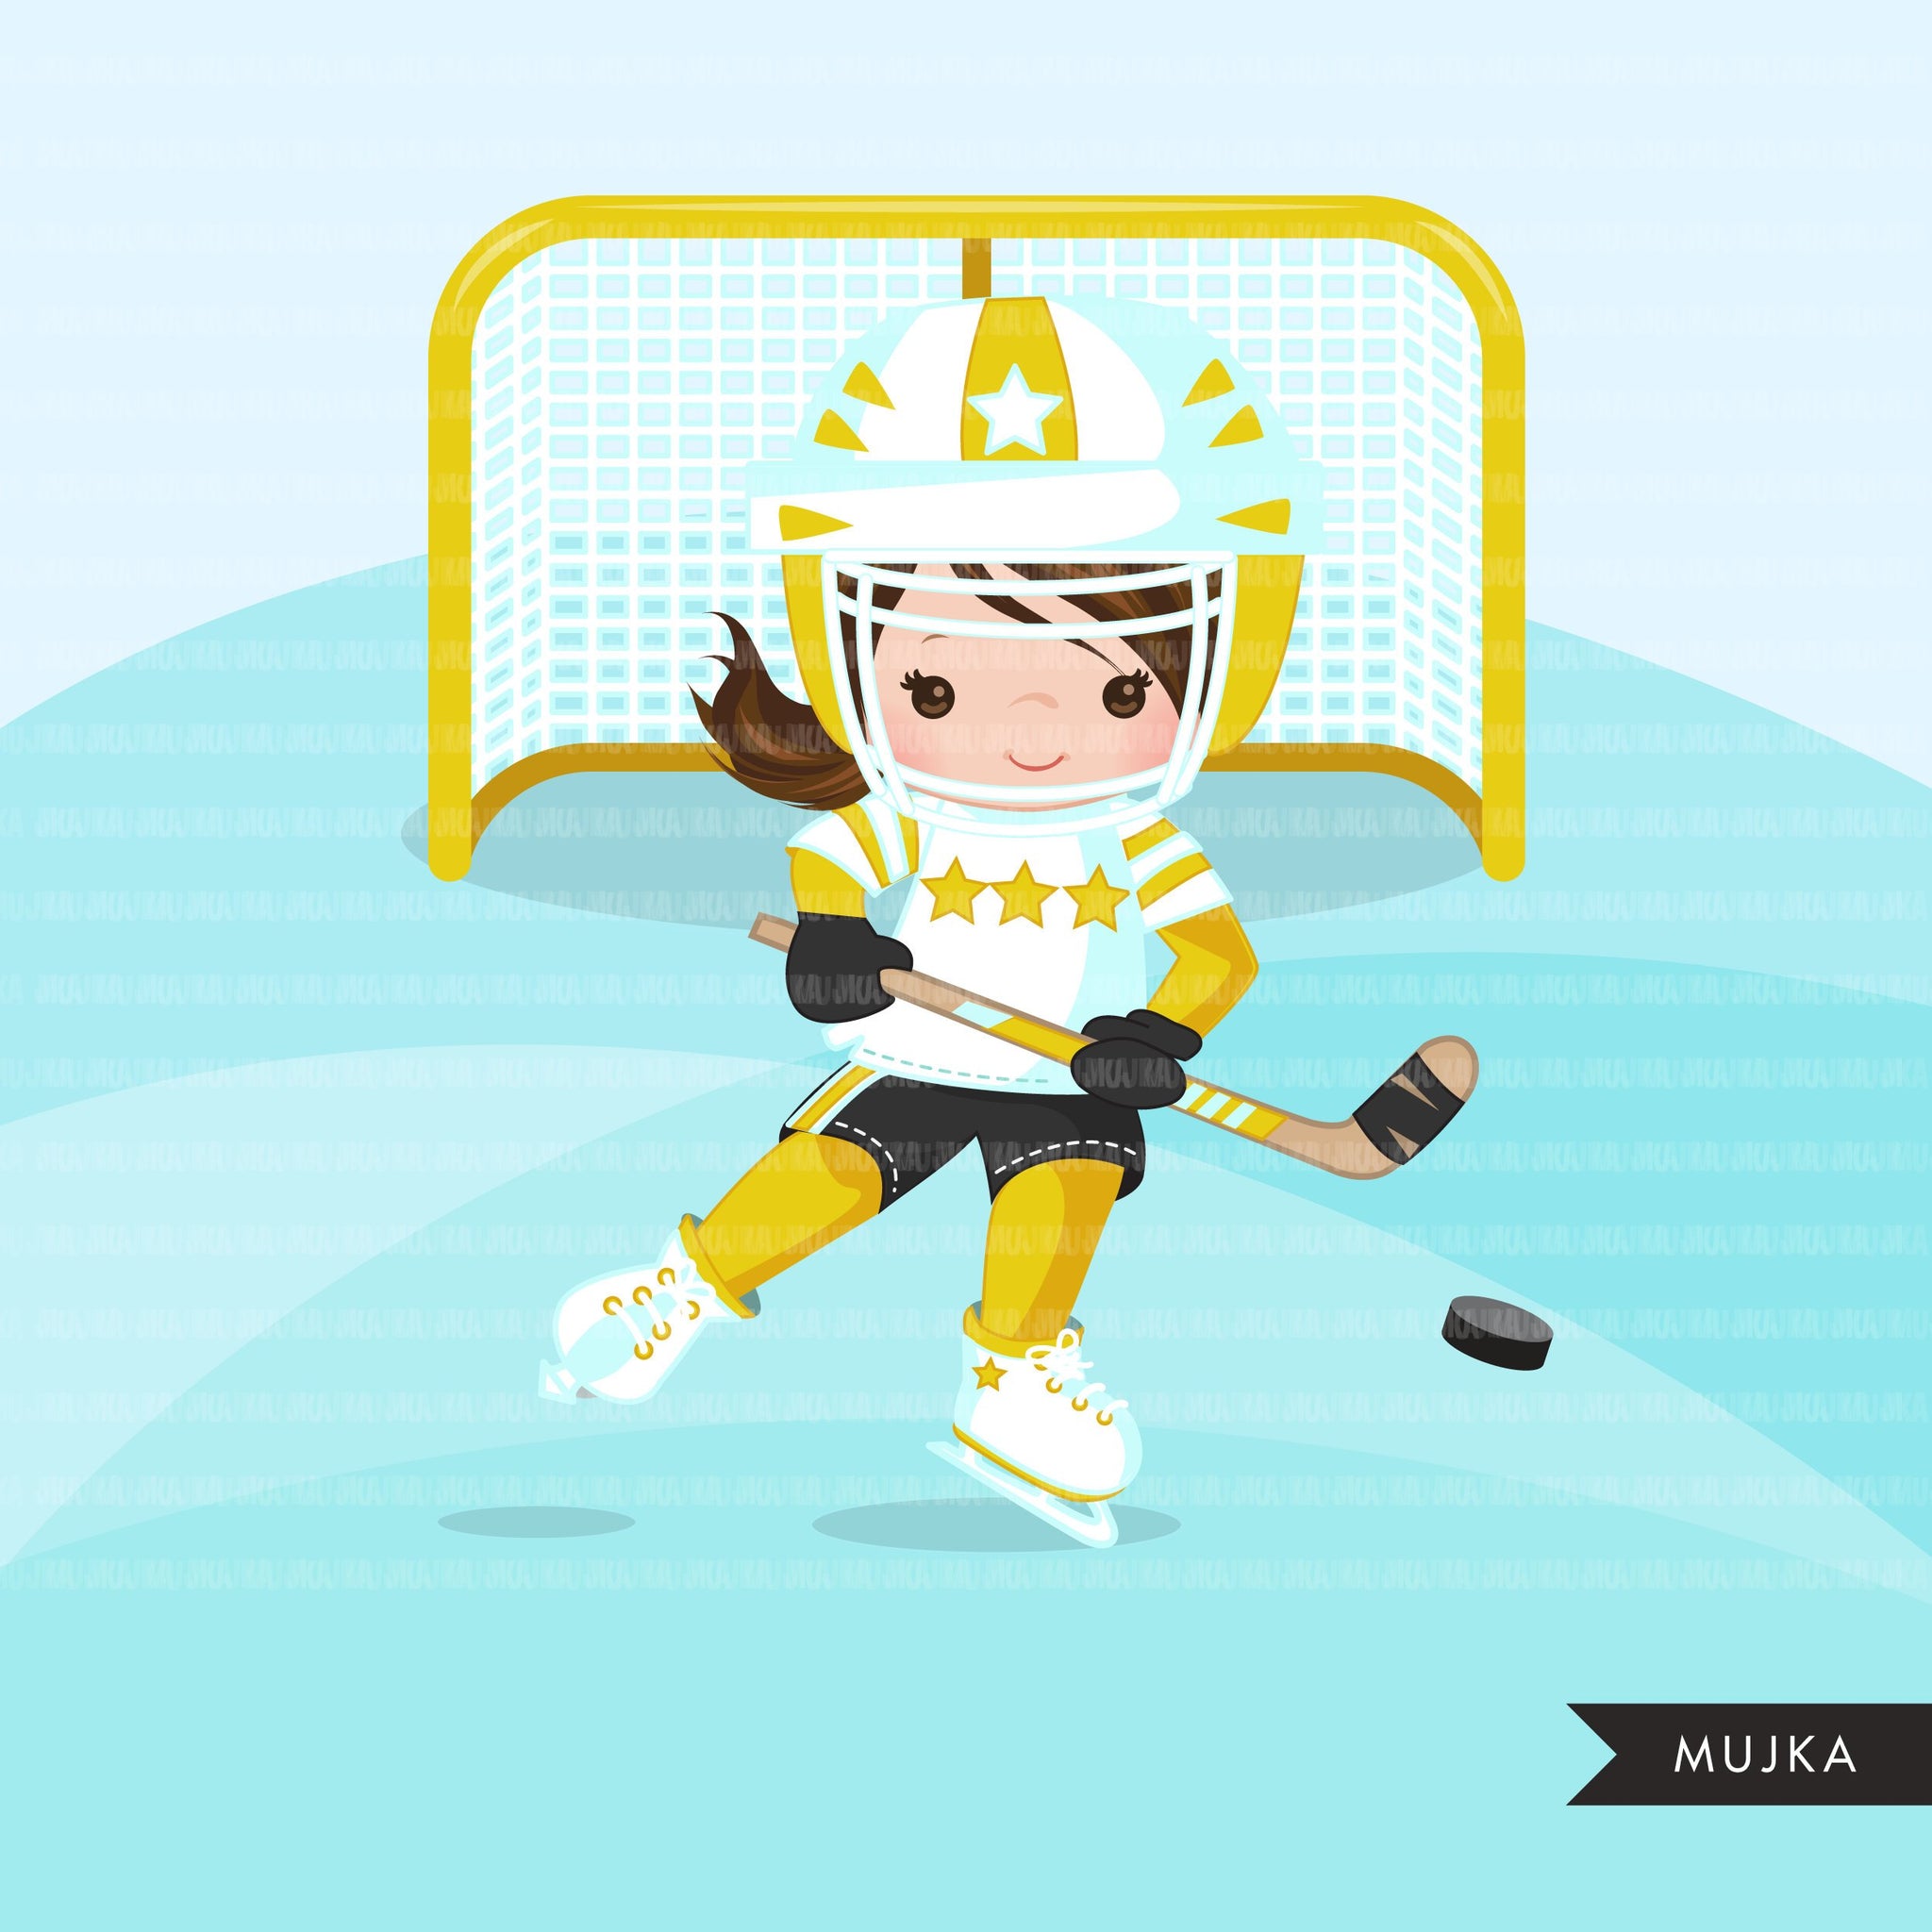 hockey player clipart back